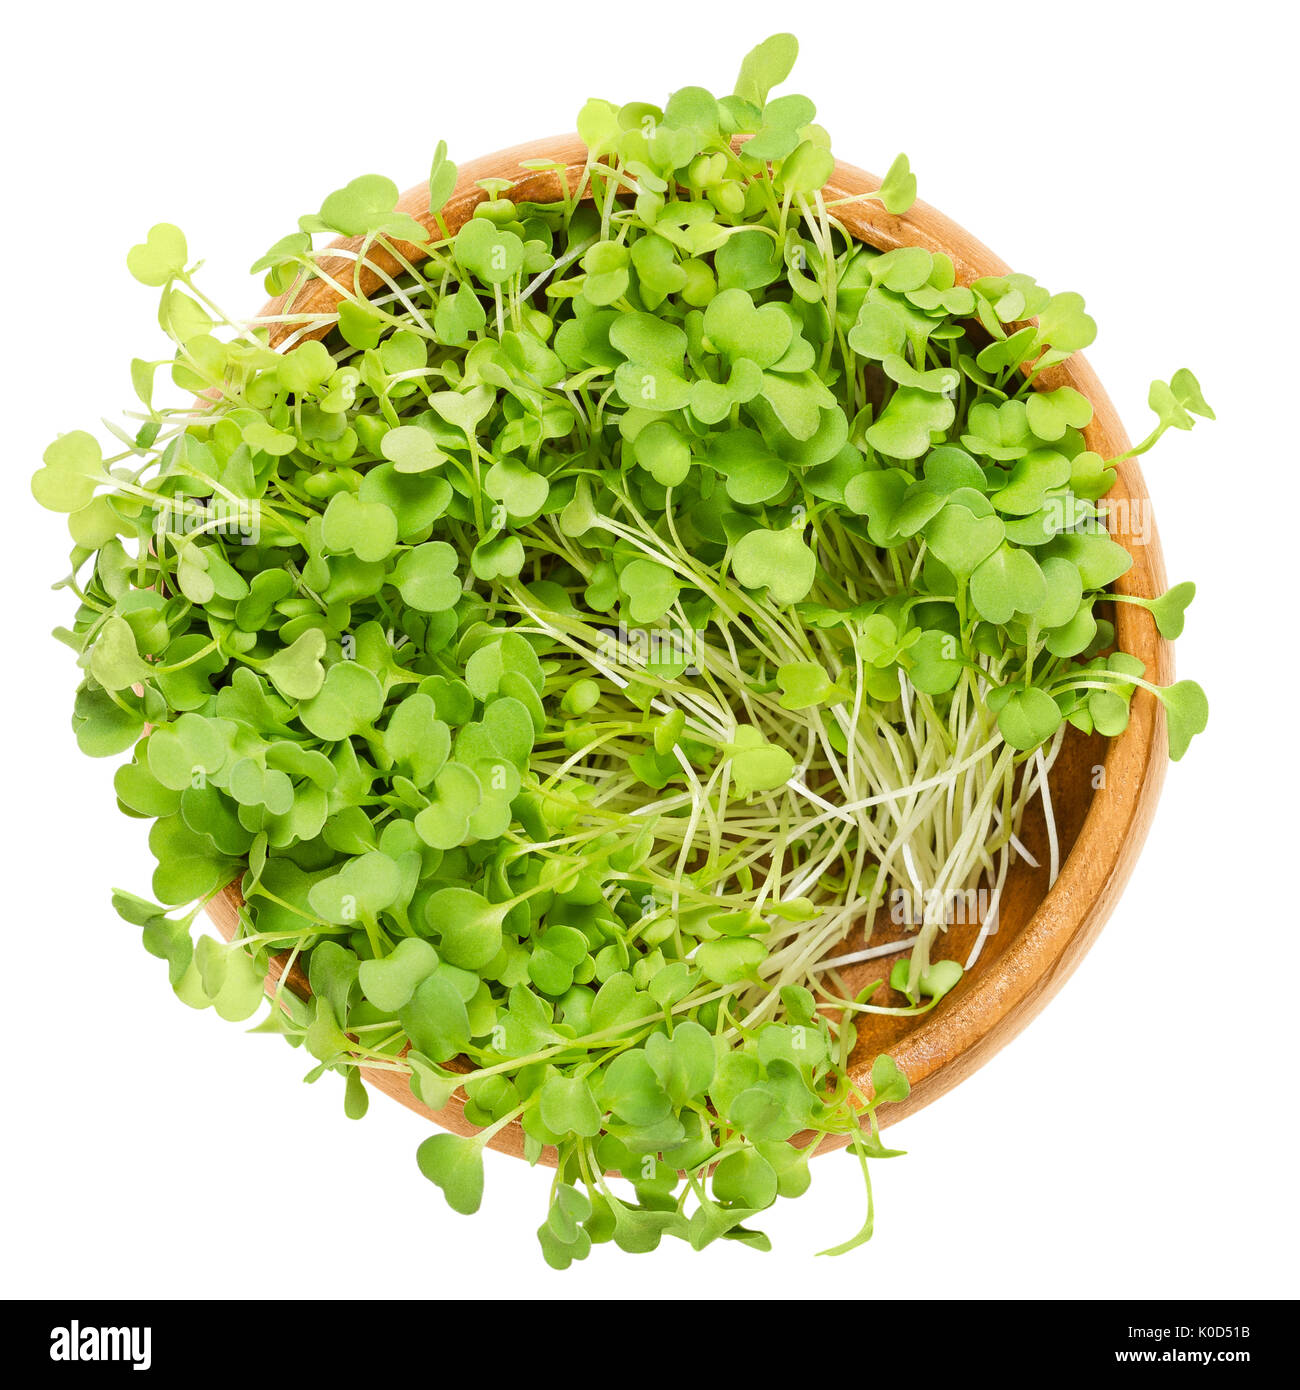 Rocket salad sprouts in wooden bowl. Leaves and cotyledons of Eruca sativa, also arugula, rucola or rugula.Salad vegetable and microgreen. Stock Photo